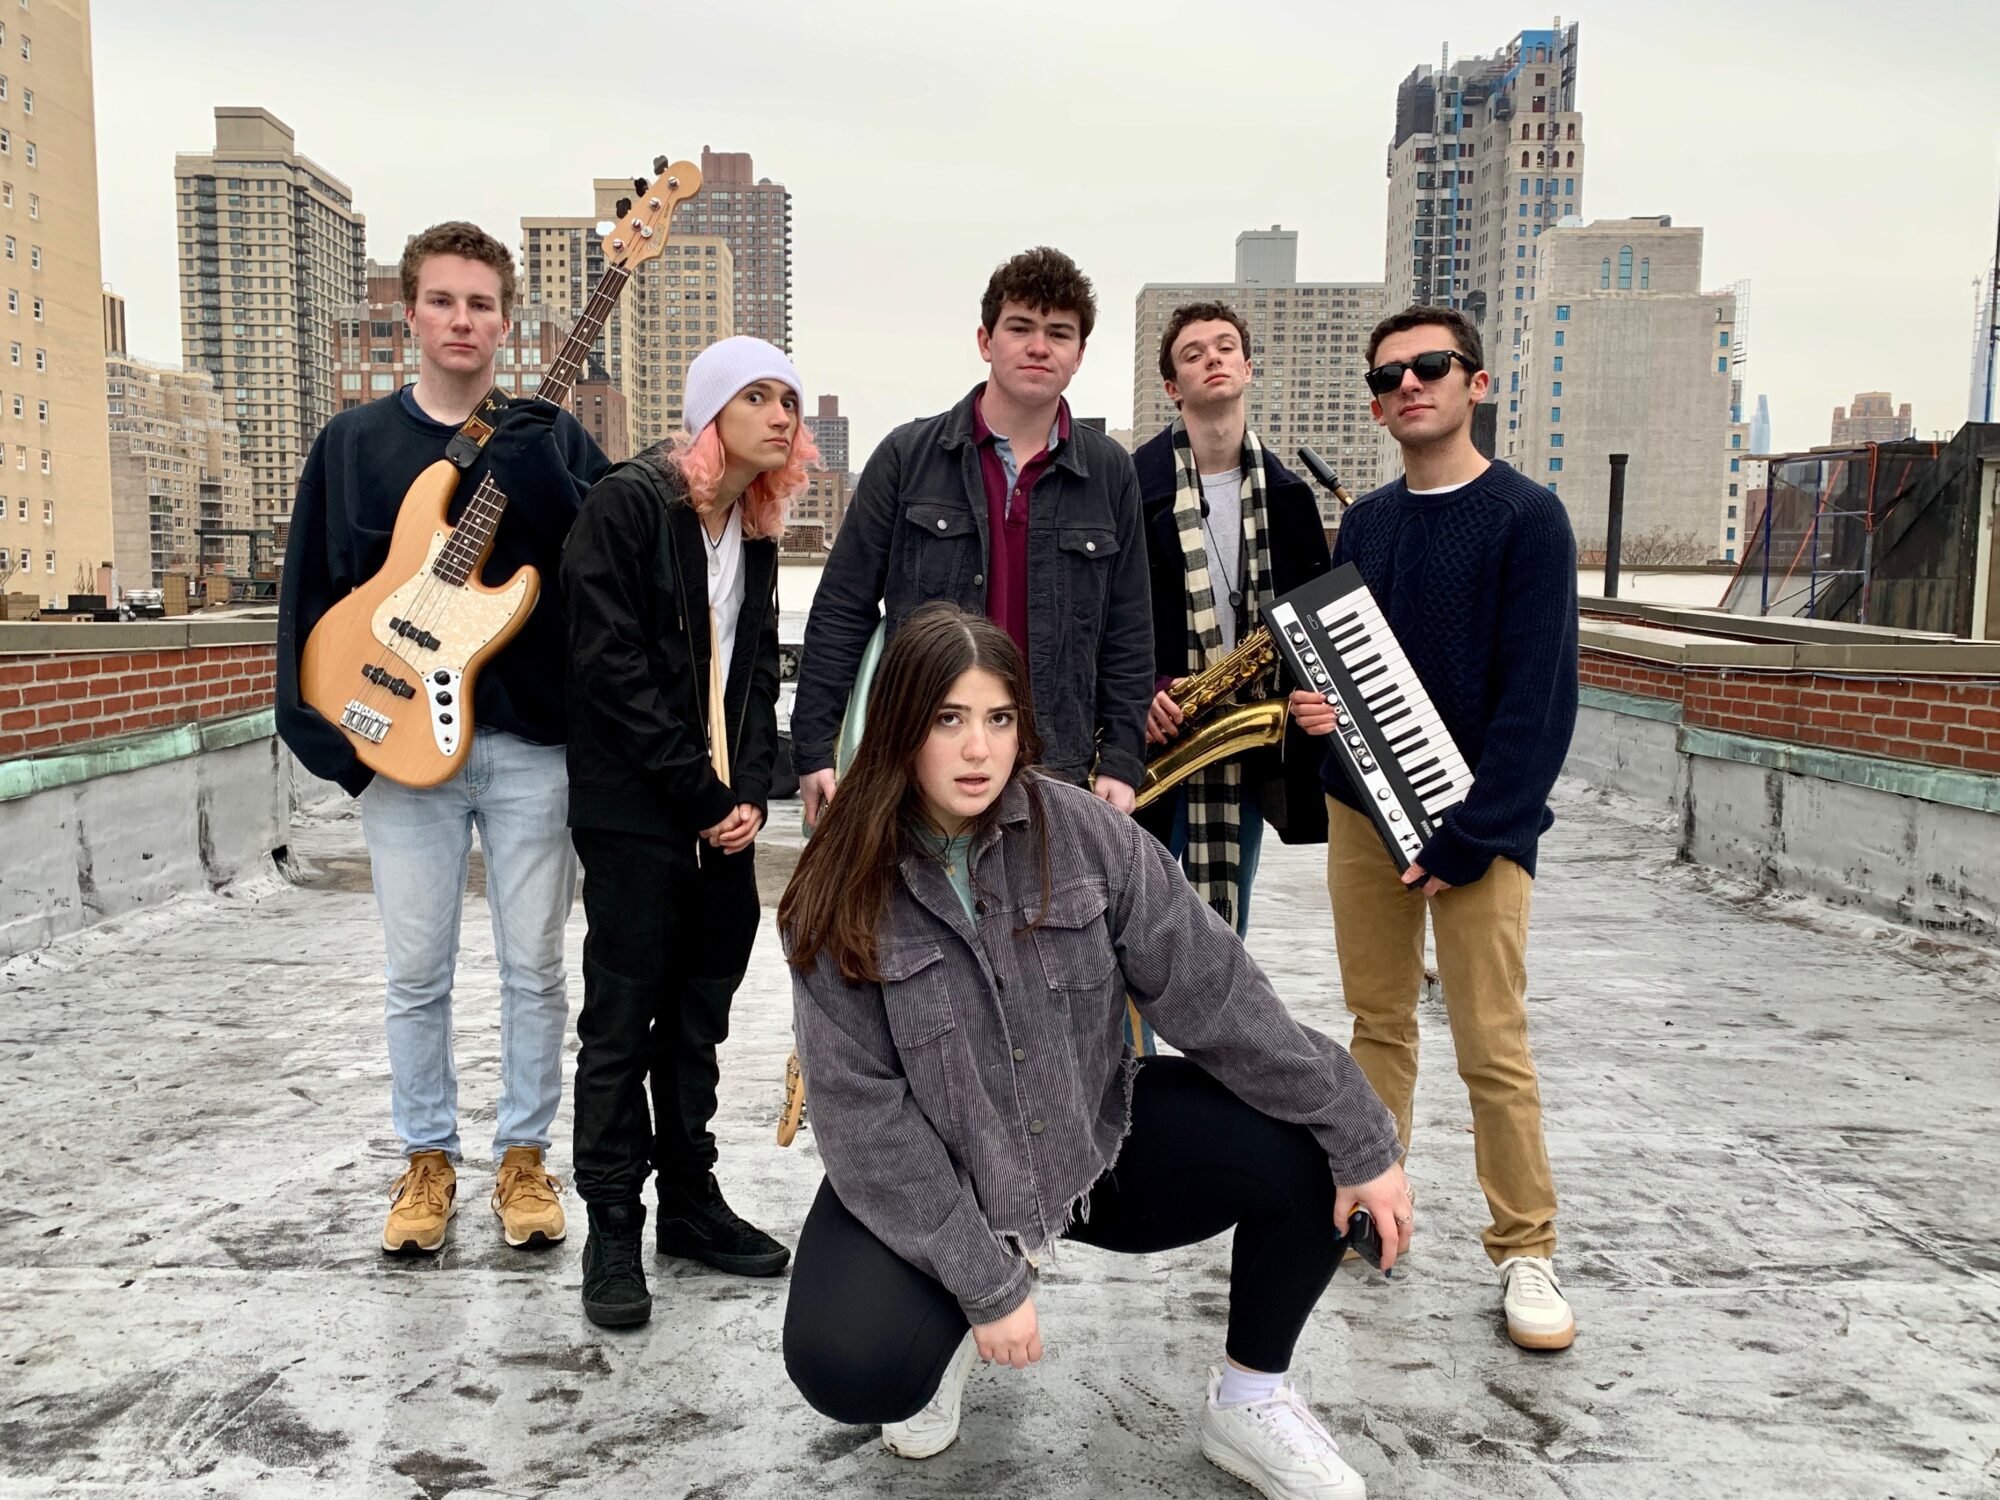 group of bandmembers on a rooftop in syracuse